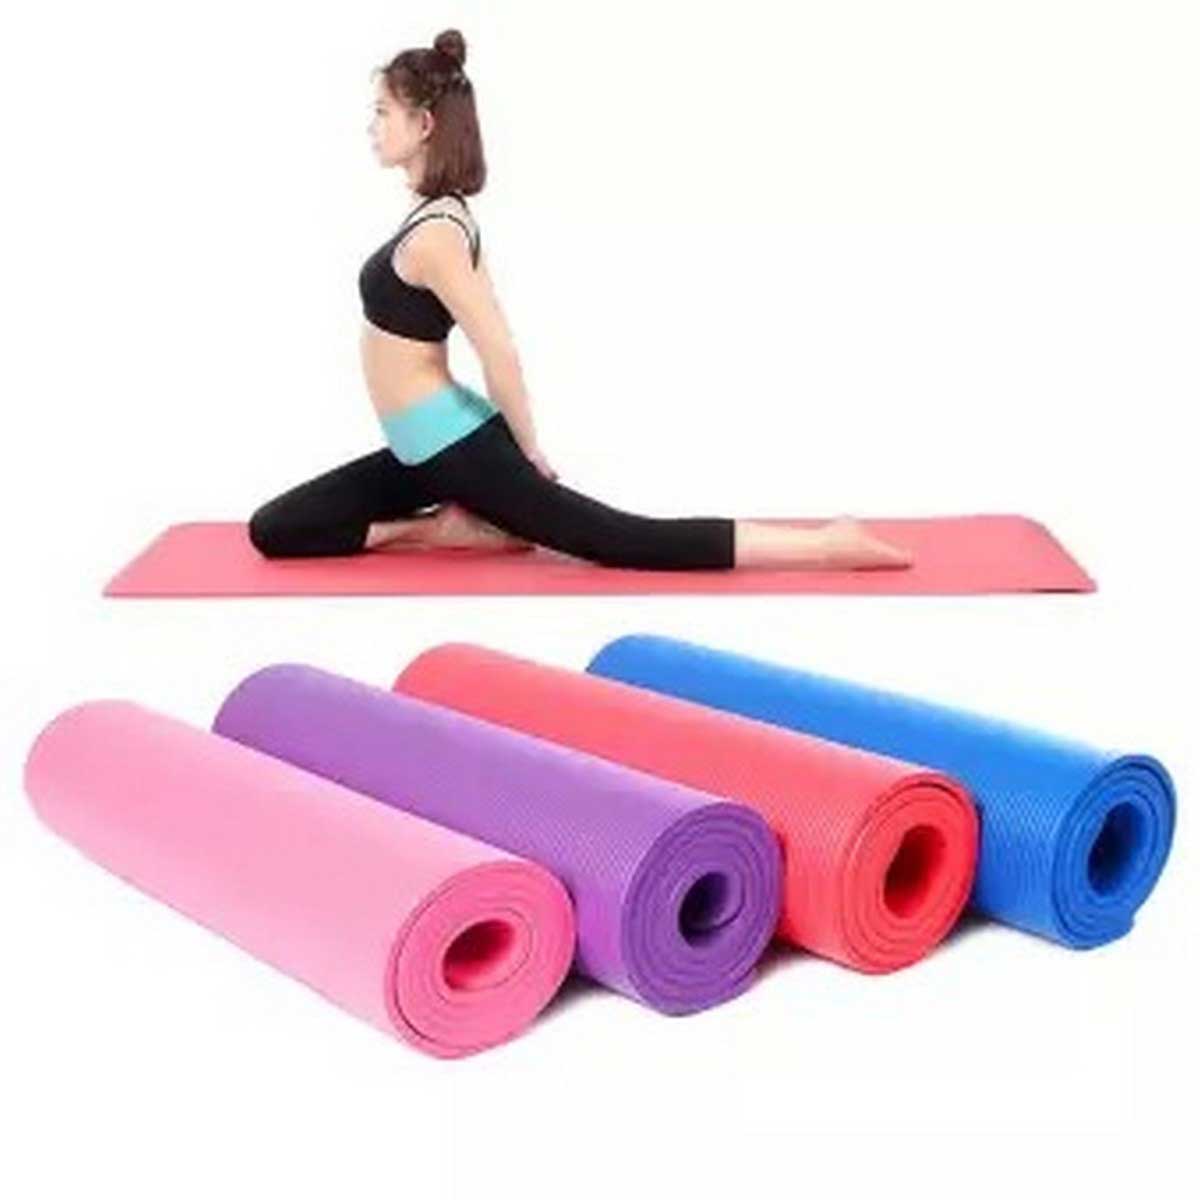 What is the best thickness for an exercise mat?